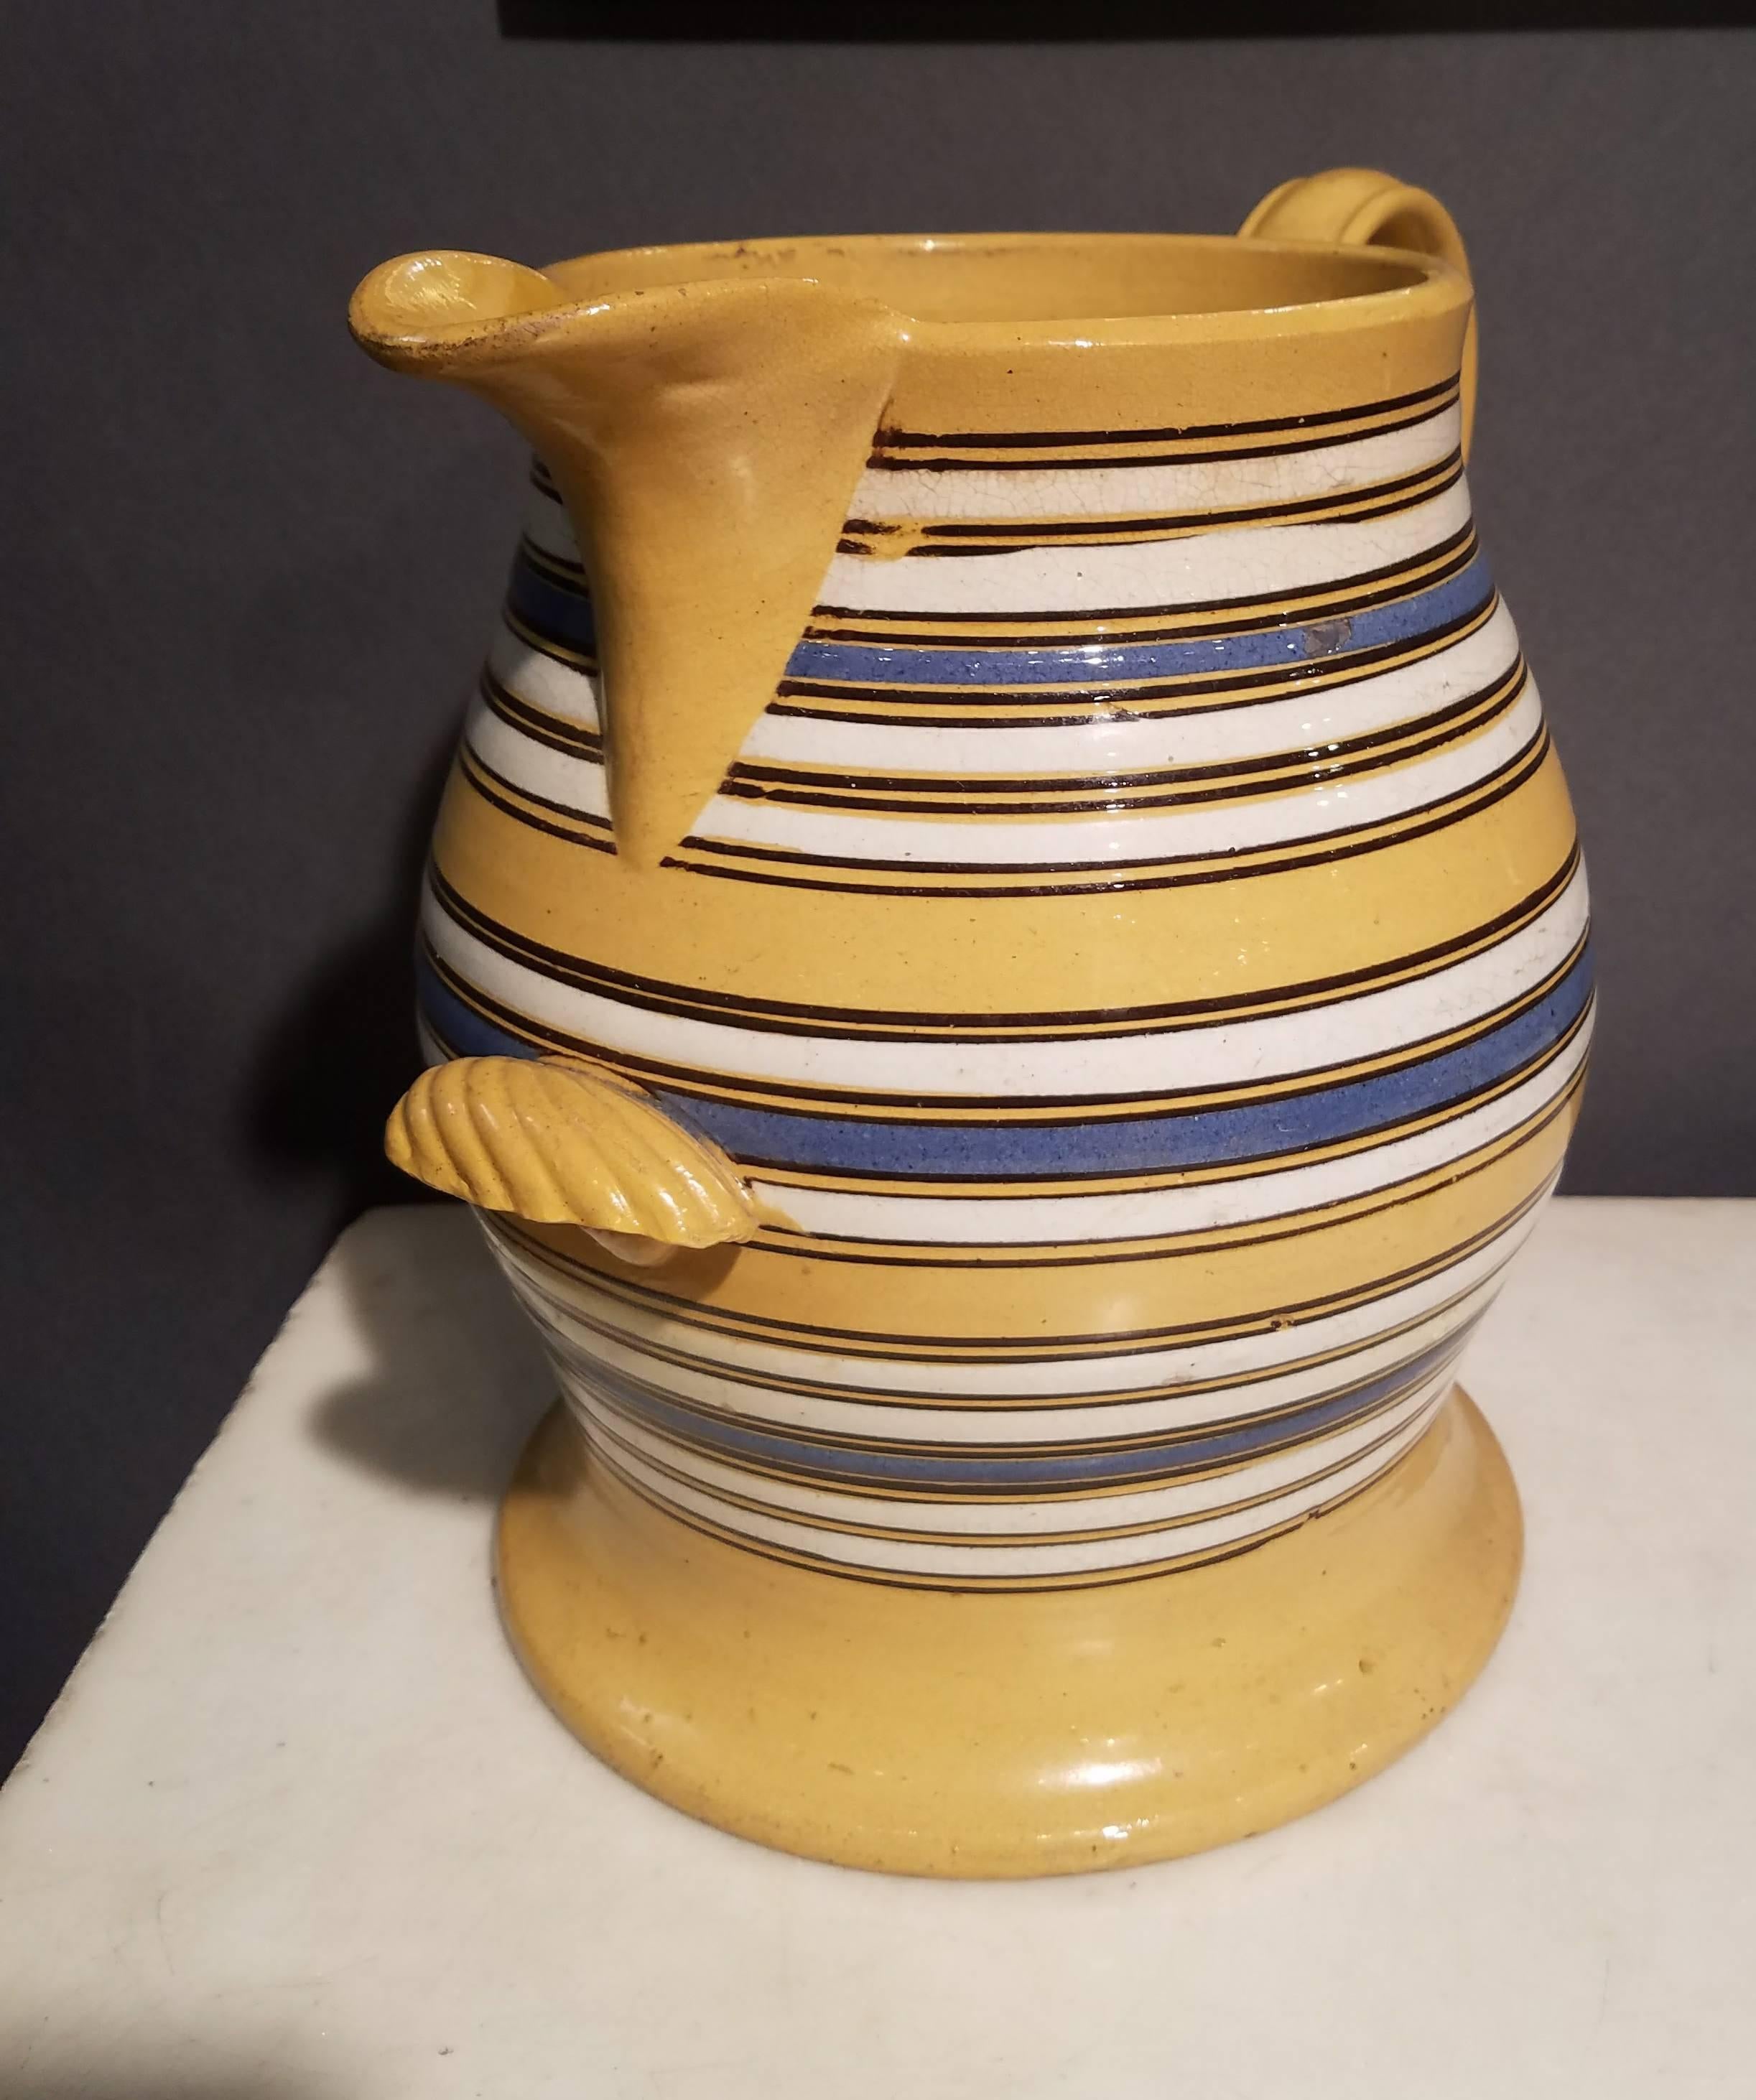 Mochaware multi-banded large yellowware jug, 
circa 1840.

A dramatic large Mochaware yellowware jug with flared foot and multiple bands of solid colour in white blue and brown. Below the spout is a large sea shell grip (off/on) to help steady